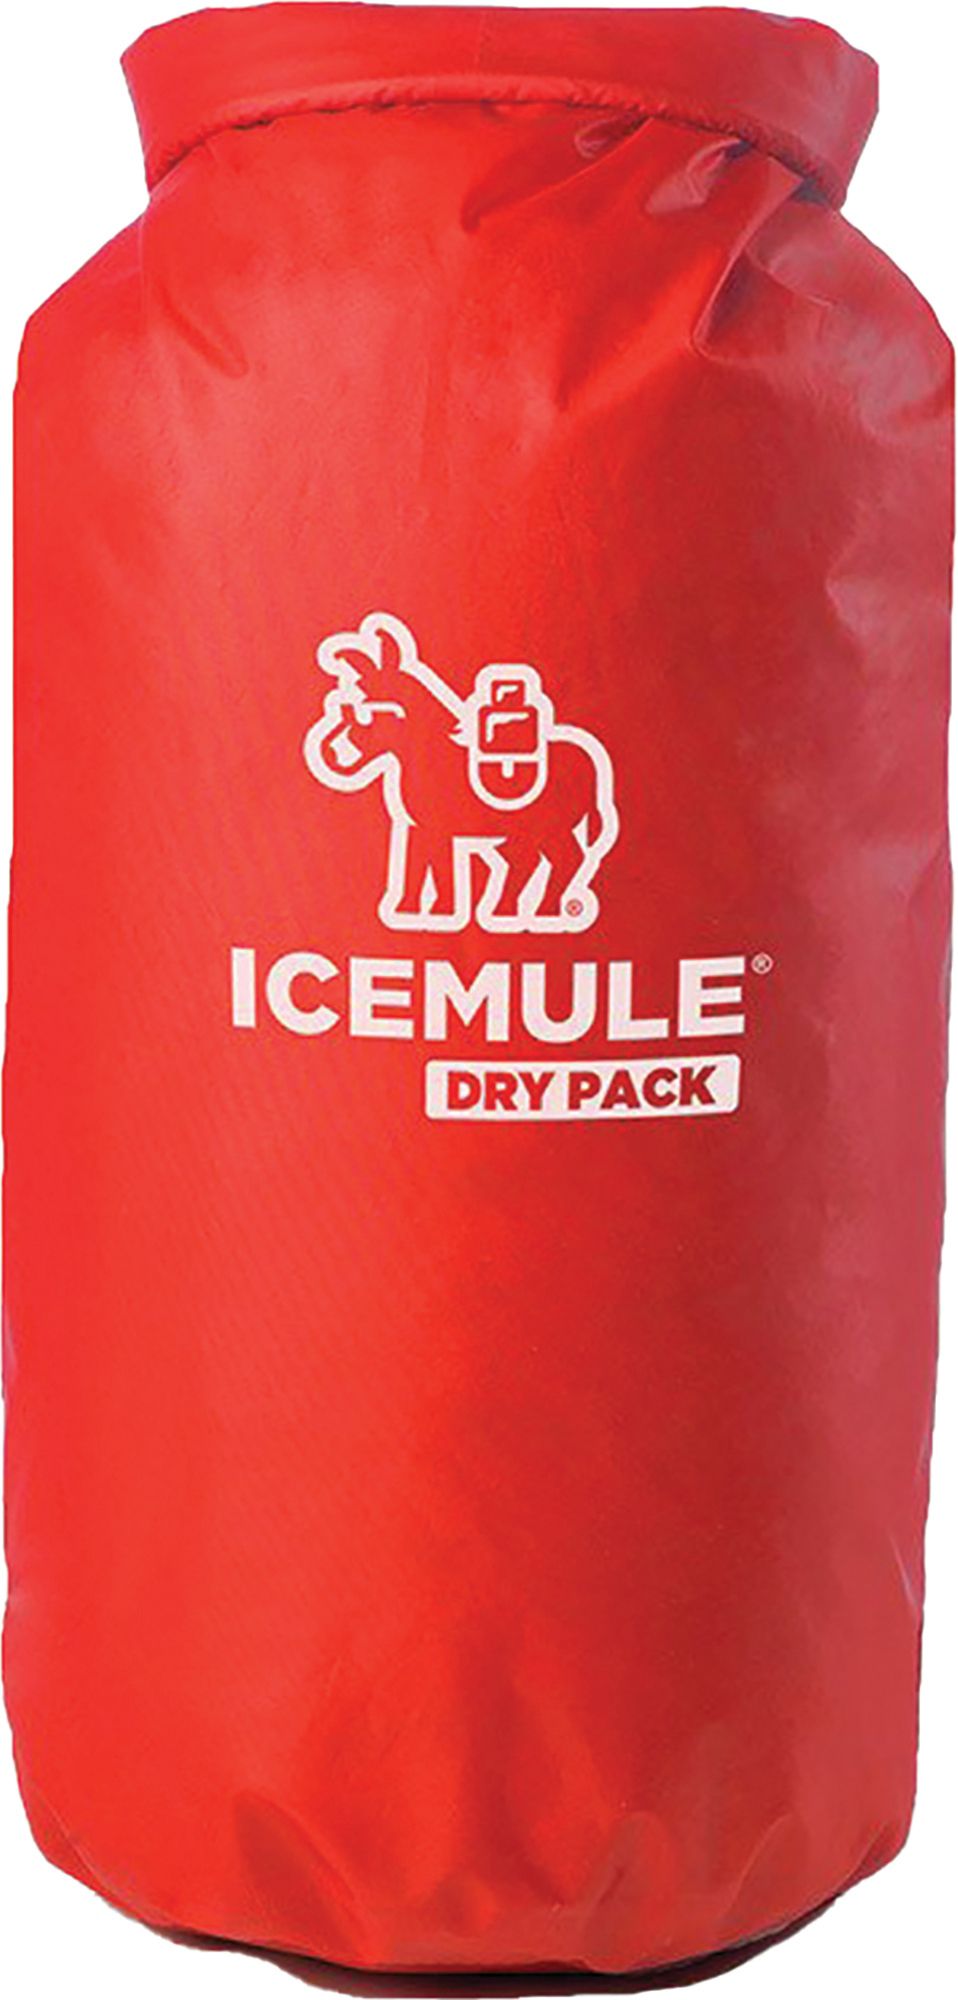 Photos - Cooler Bag ICEMULE Dry Pack 1300 Dry Bag, Red 22ICEUDRYPCK1300XREC